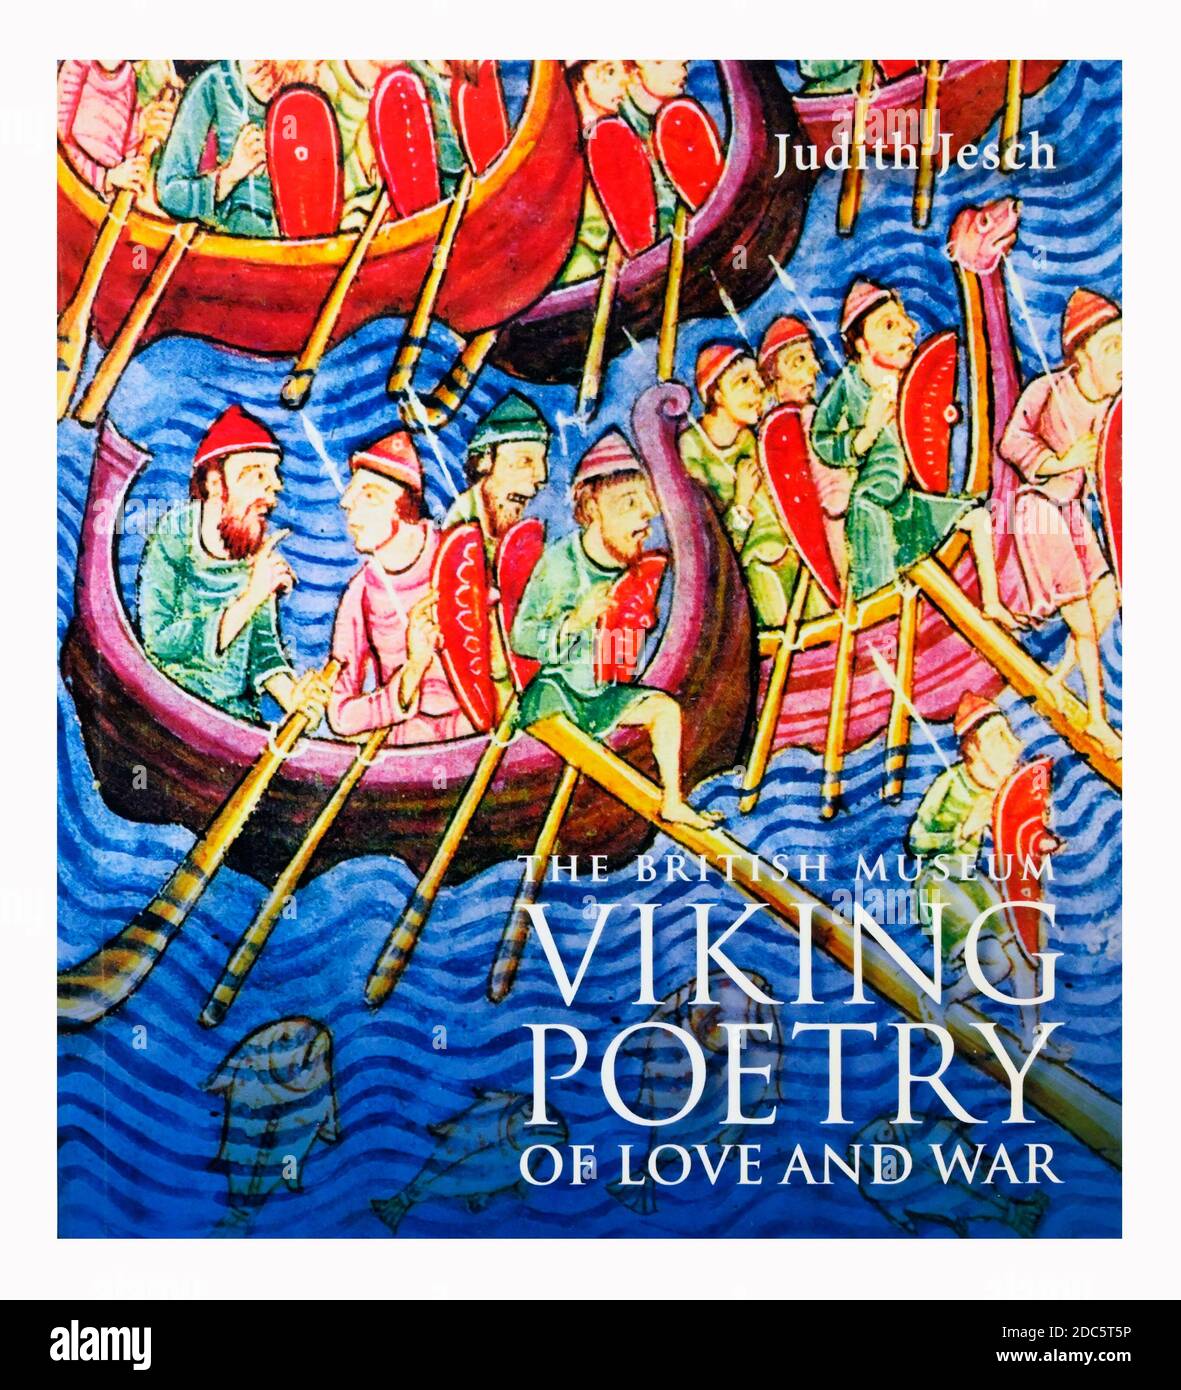 Book cover. 'The British Museum Viking Poetry of Love and War' by Judith Jesch. Stock Photo